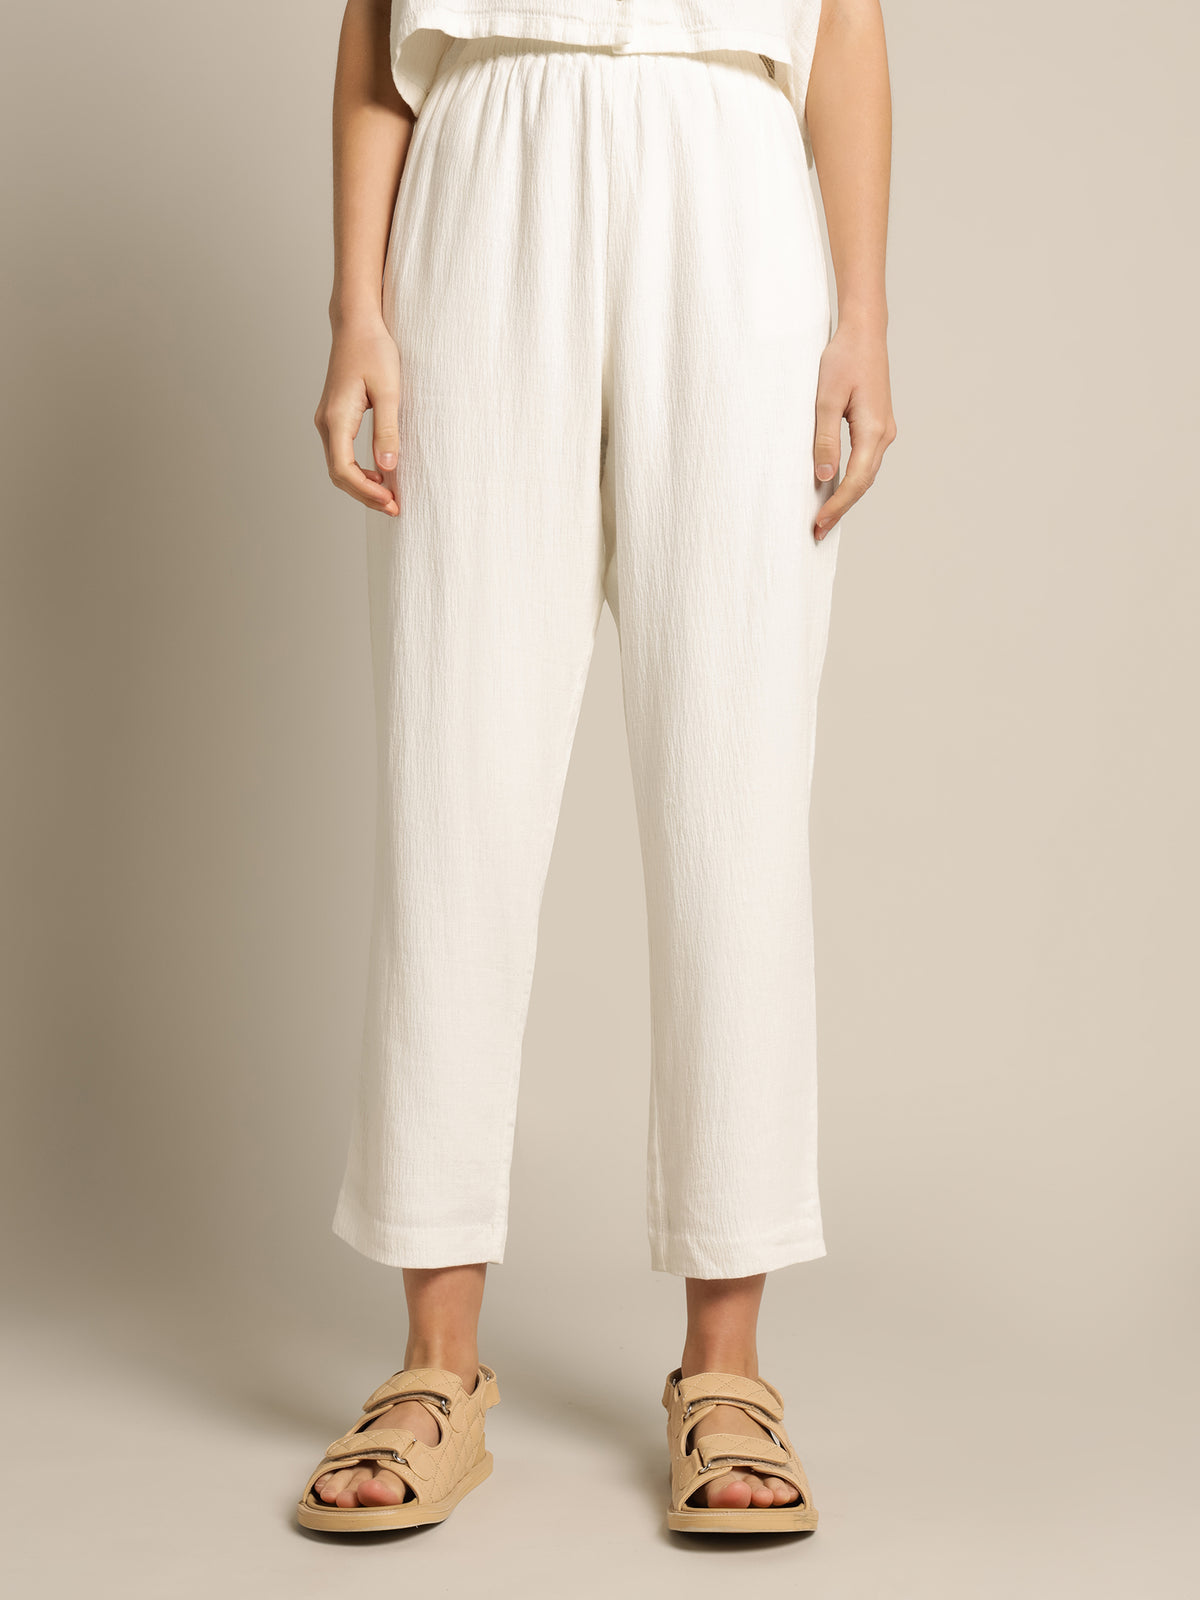 Rumi Relaxed Pants in White